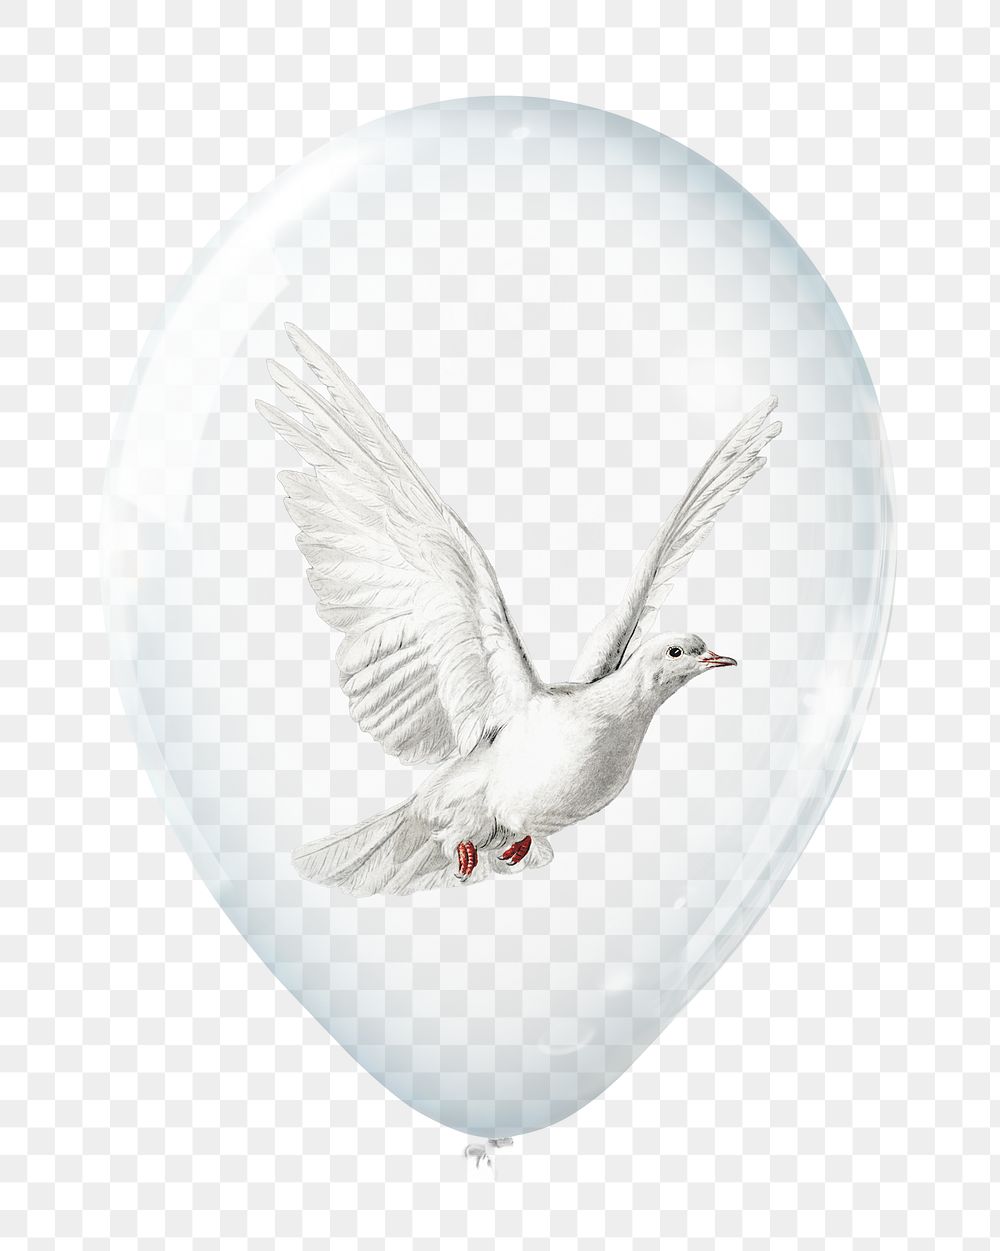 Flying dove png sticker, animal in clear balloon, transparent background